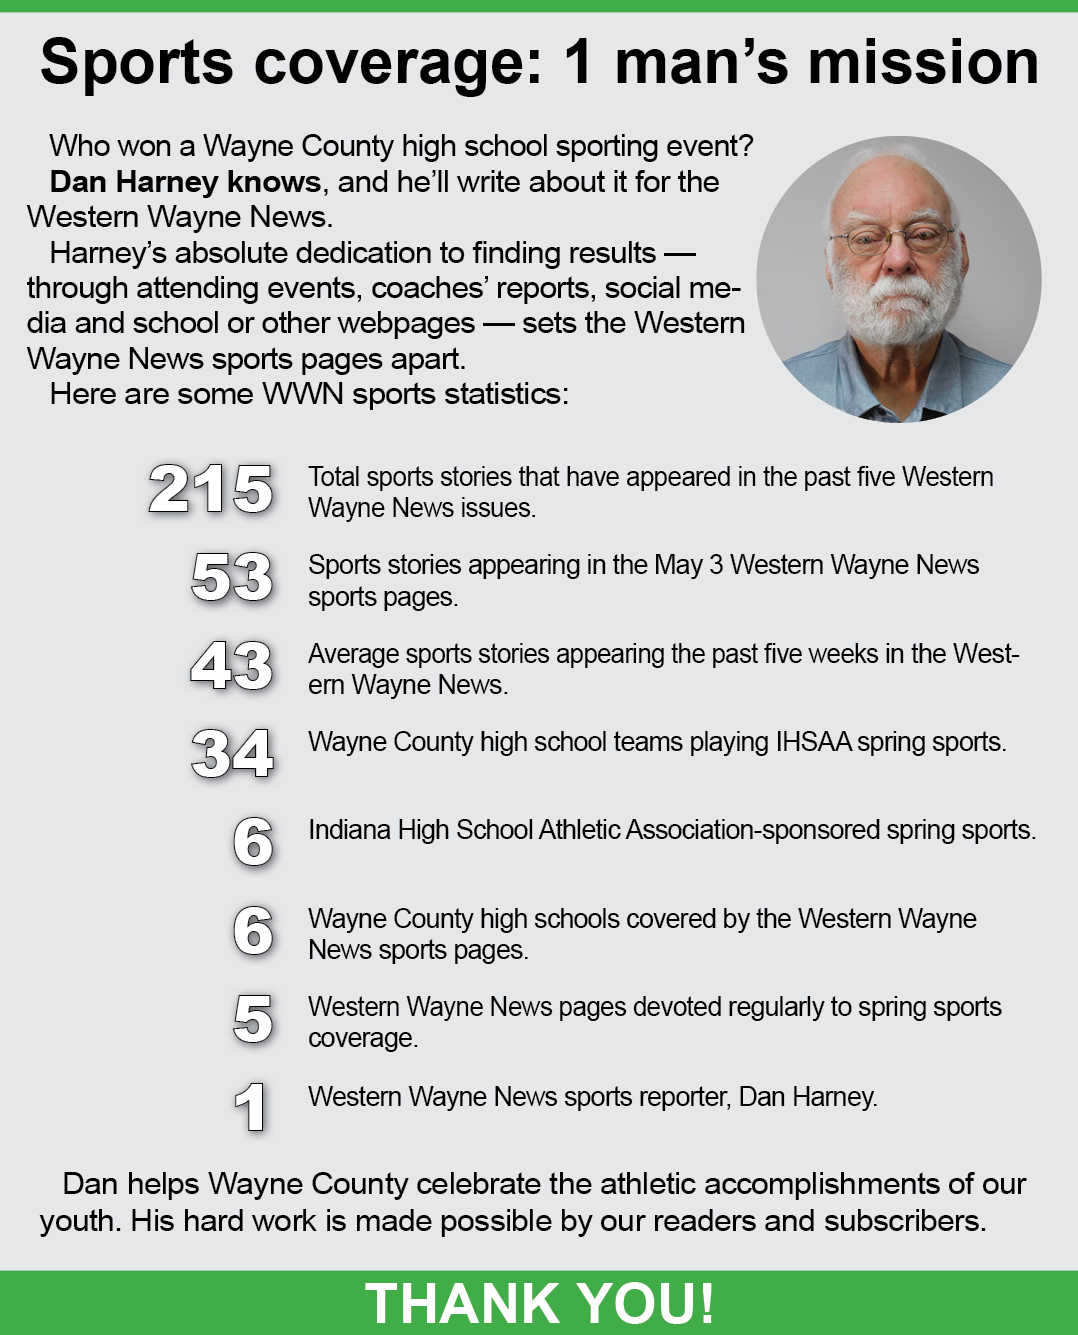 An image showing a photo of WWN sports reporter Dan Harney alongside various numbers of interest related to the paper's sports coverage, including 215 total sports stories that have appeared in the past 5 WWN issues, 53 sports stories appearing in the May 3 issue alone, 43 average sports stories appearing in the past 5 weeks in the WWN, 6 Wayne County high schools covered by the WWN, 5 WWN pages regularly devoted to spring sports coverage, and 1 reporter, Dan.